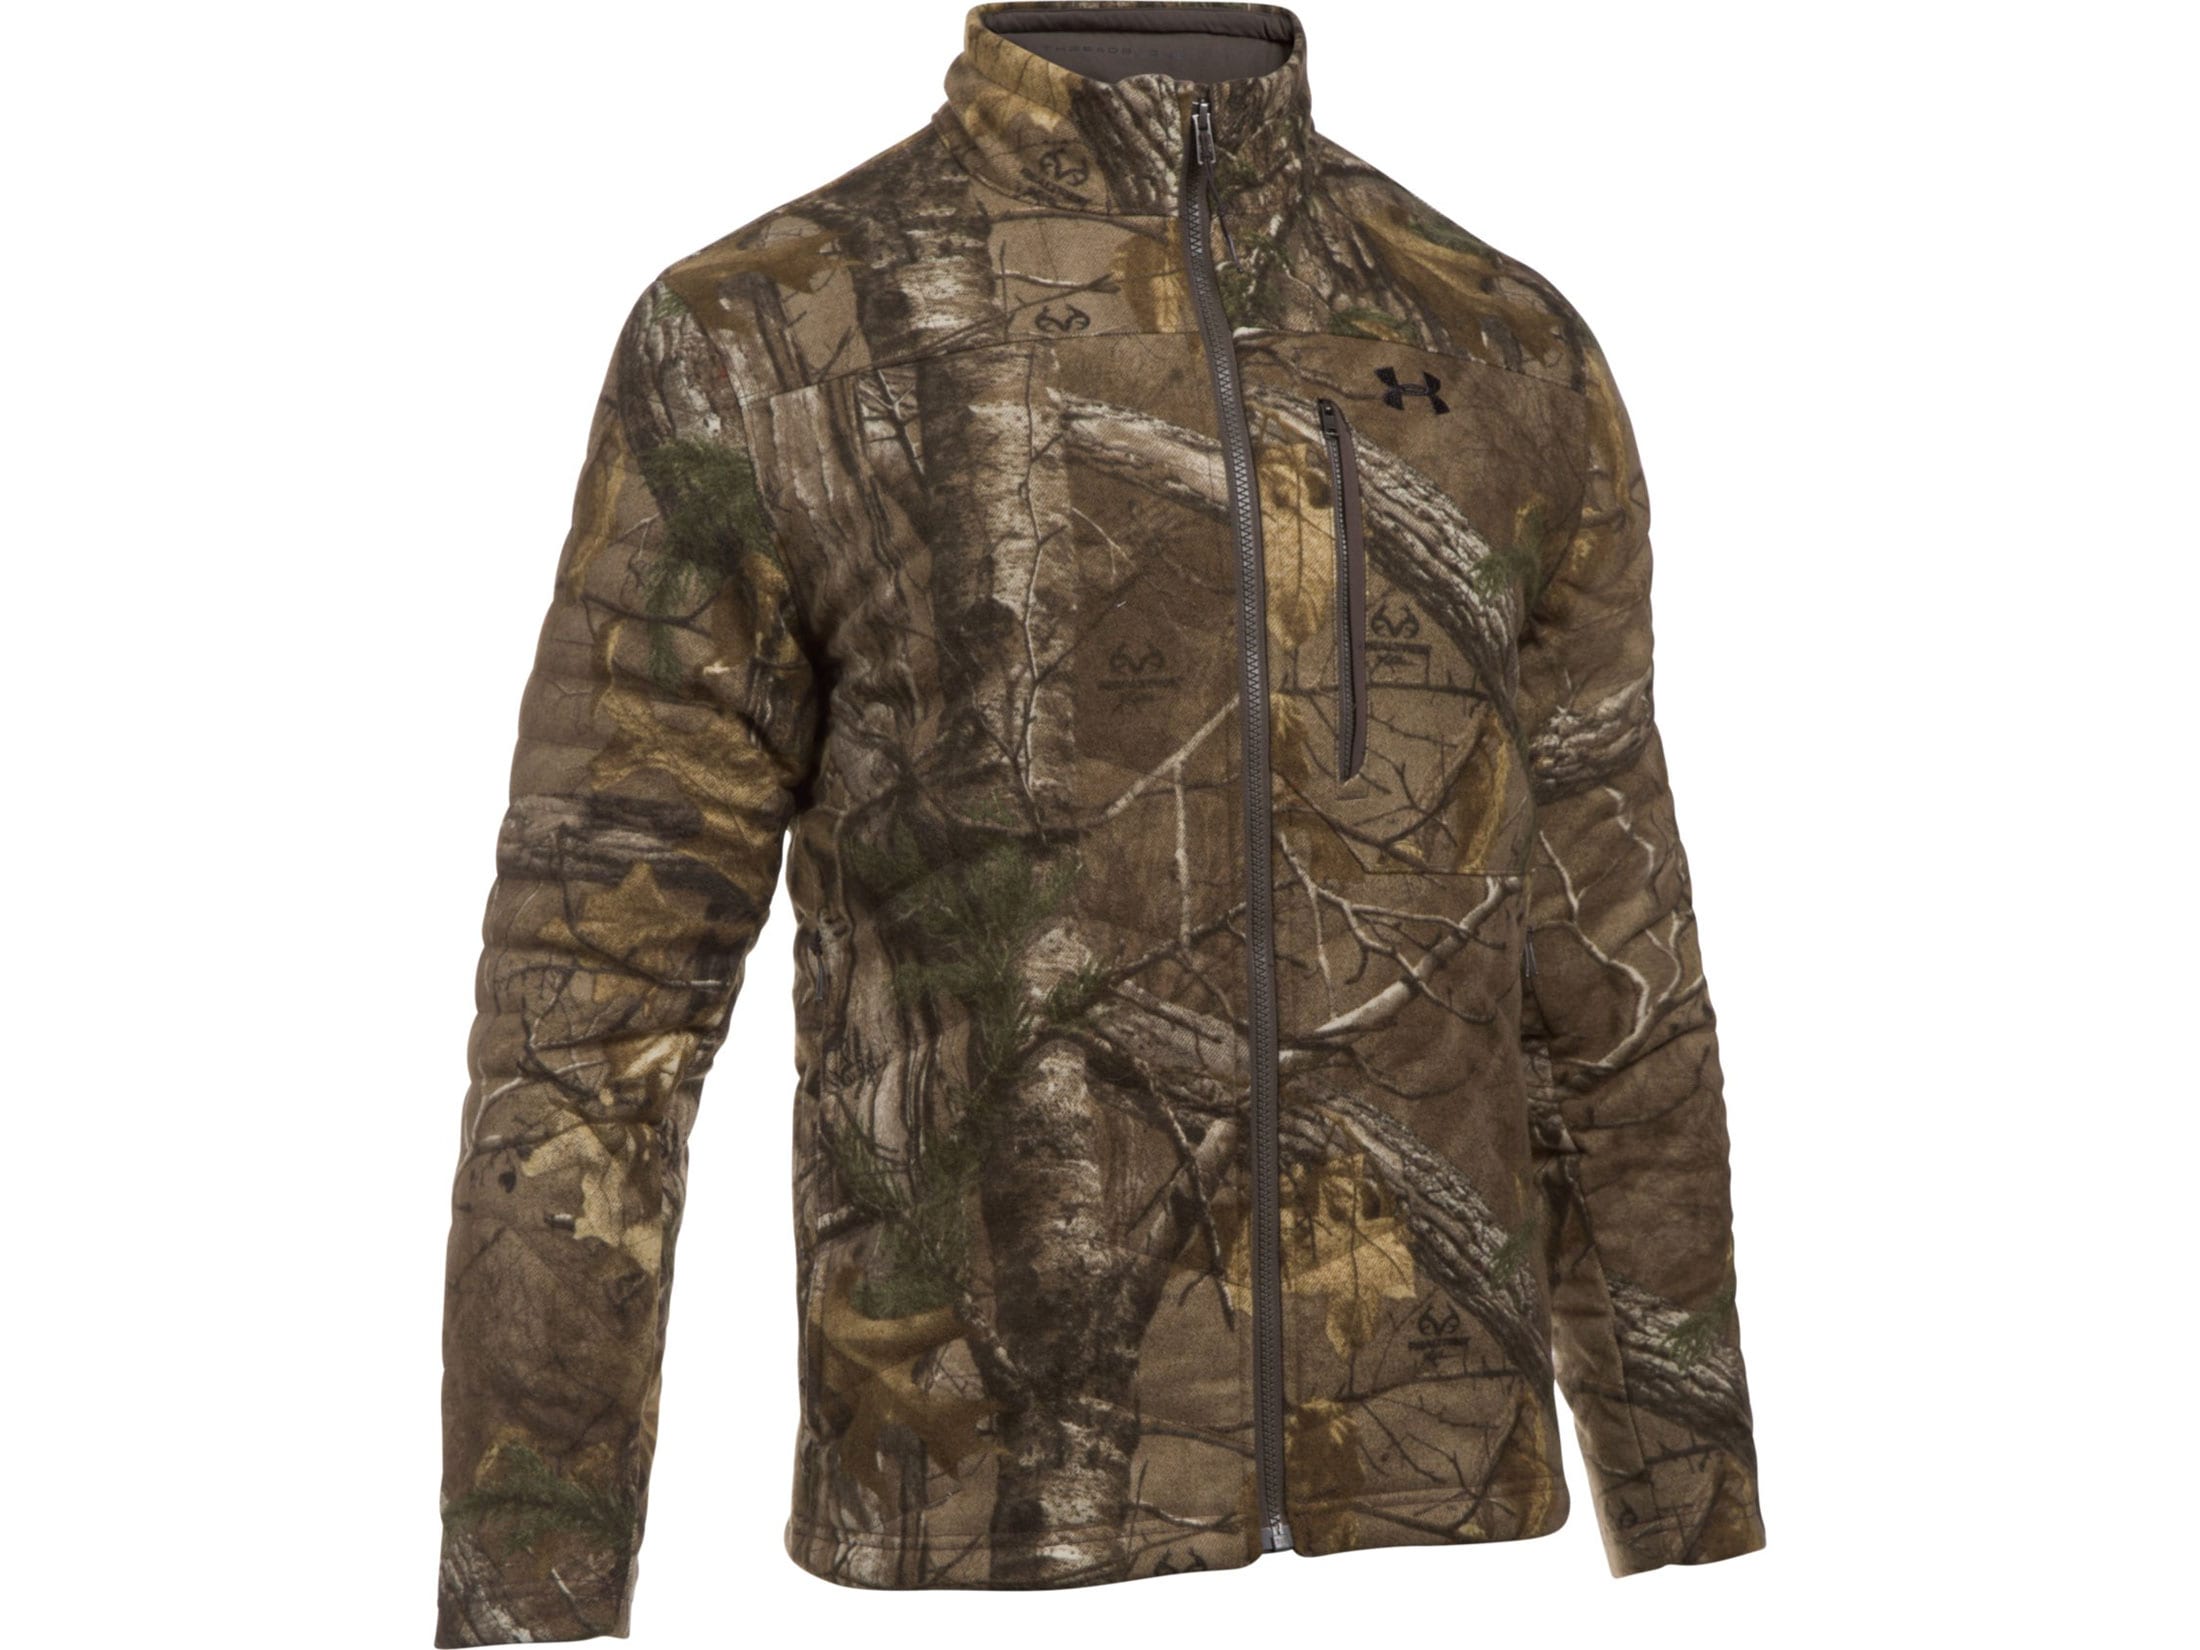 Under Armor Mens Extreme Wool Jacket 